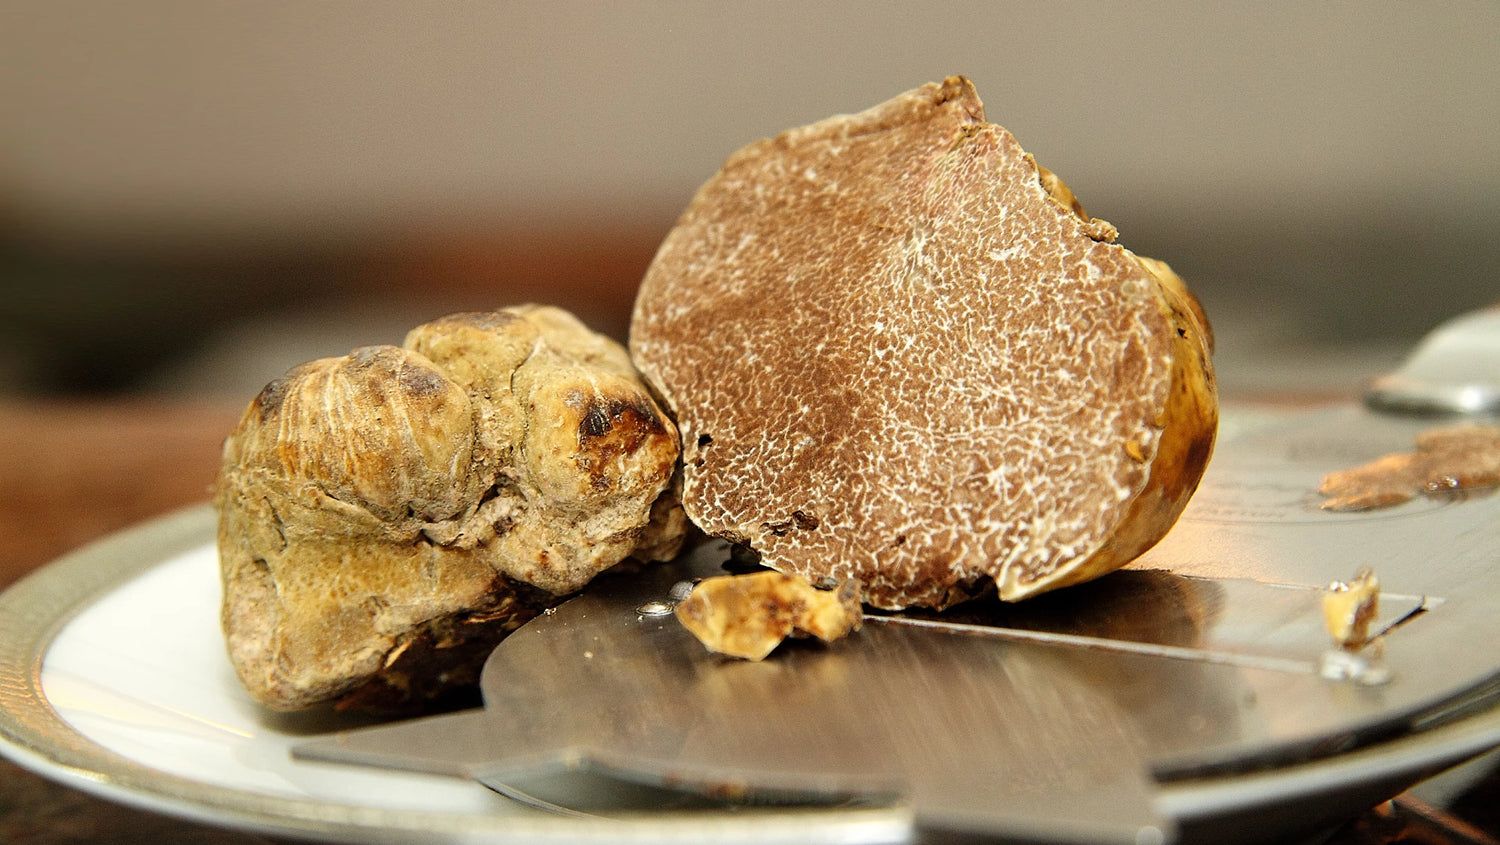 Prized Delicacy: Truffles are highly prized for their intense aroma and distinctive flavor, making them a sought-after ingredient in gourmet cuisine. ]]>